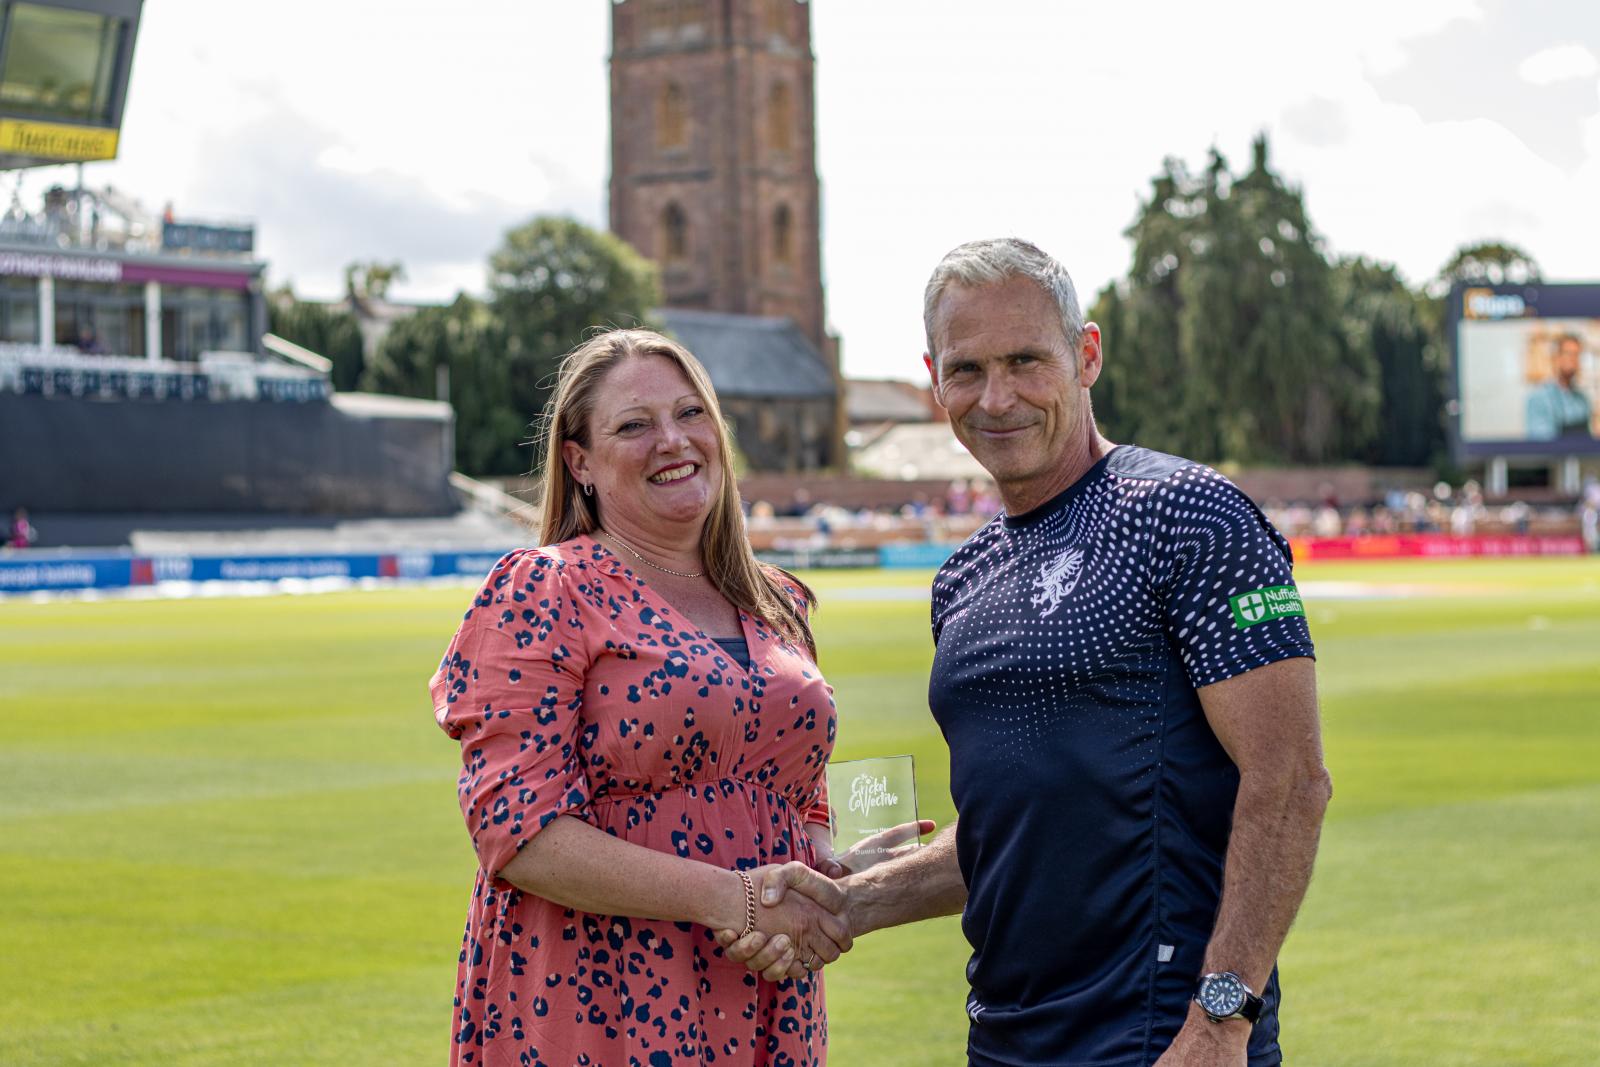 Dawn Green receives her award at the Cooper Associates County Ground.